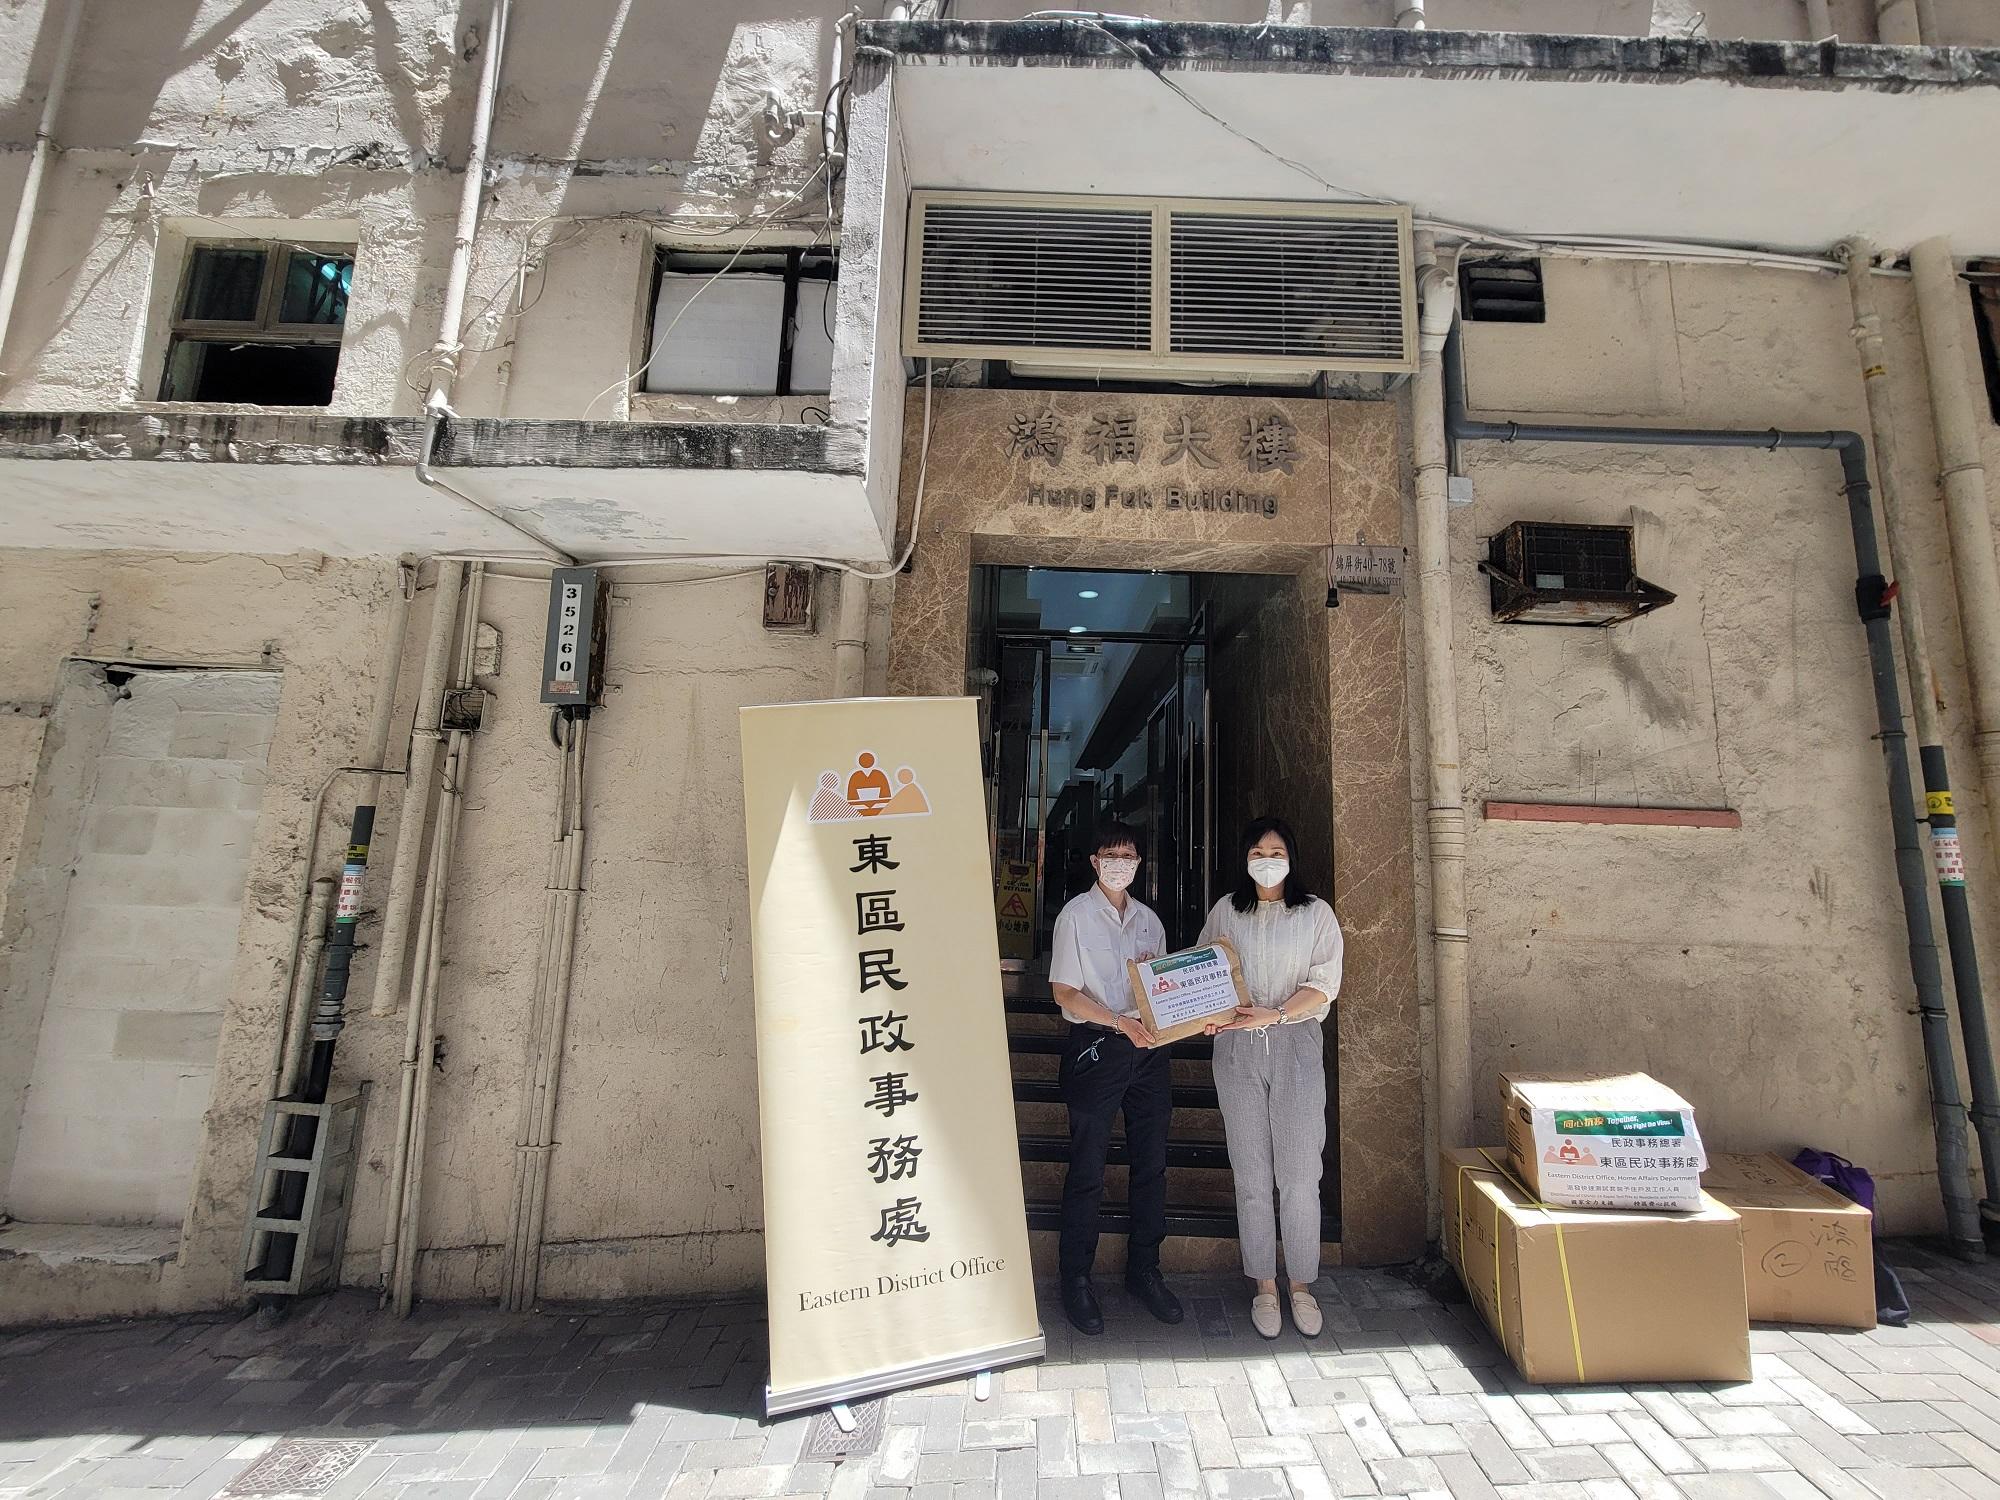 The Eastern District Office today (June 27) distributed COVID-19 rapid test kits to households, cleansing workers and property management staff living and working in Hung Fook Building for voluntary testing through the property management company.